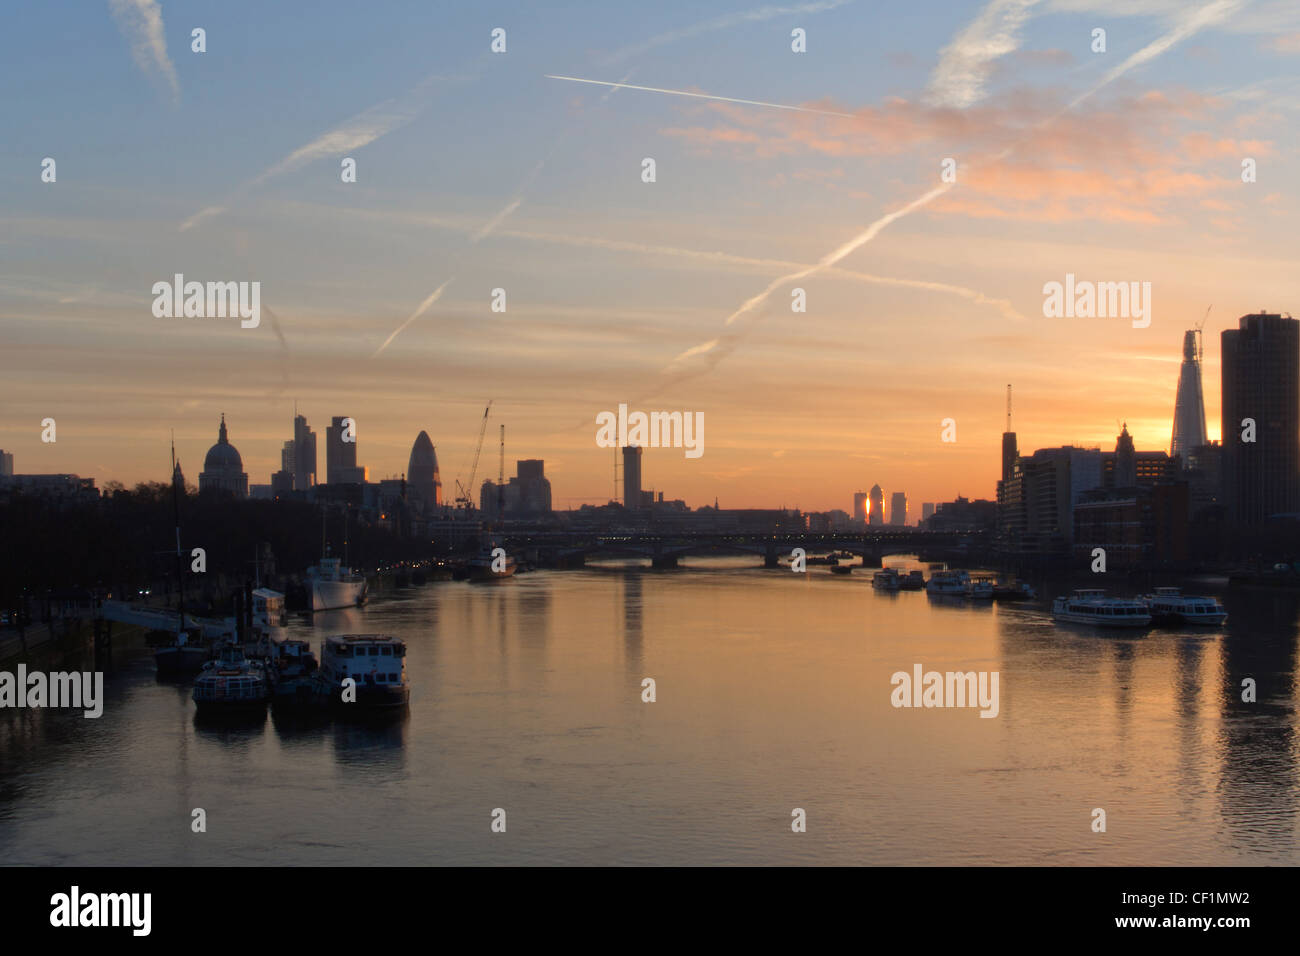 View of St. Paul's cathedral and the river Thames at sunrise. London. UK Stock Photo